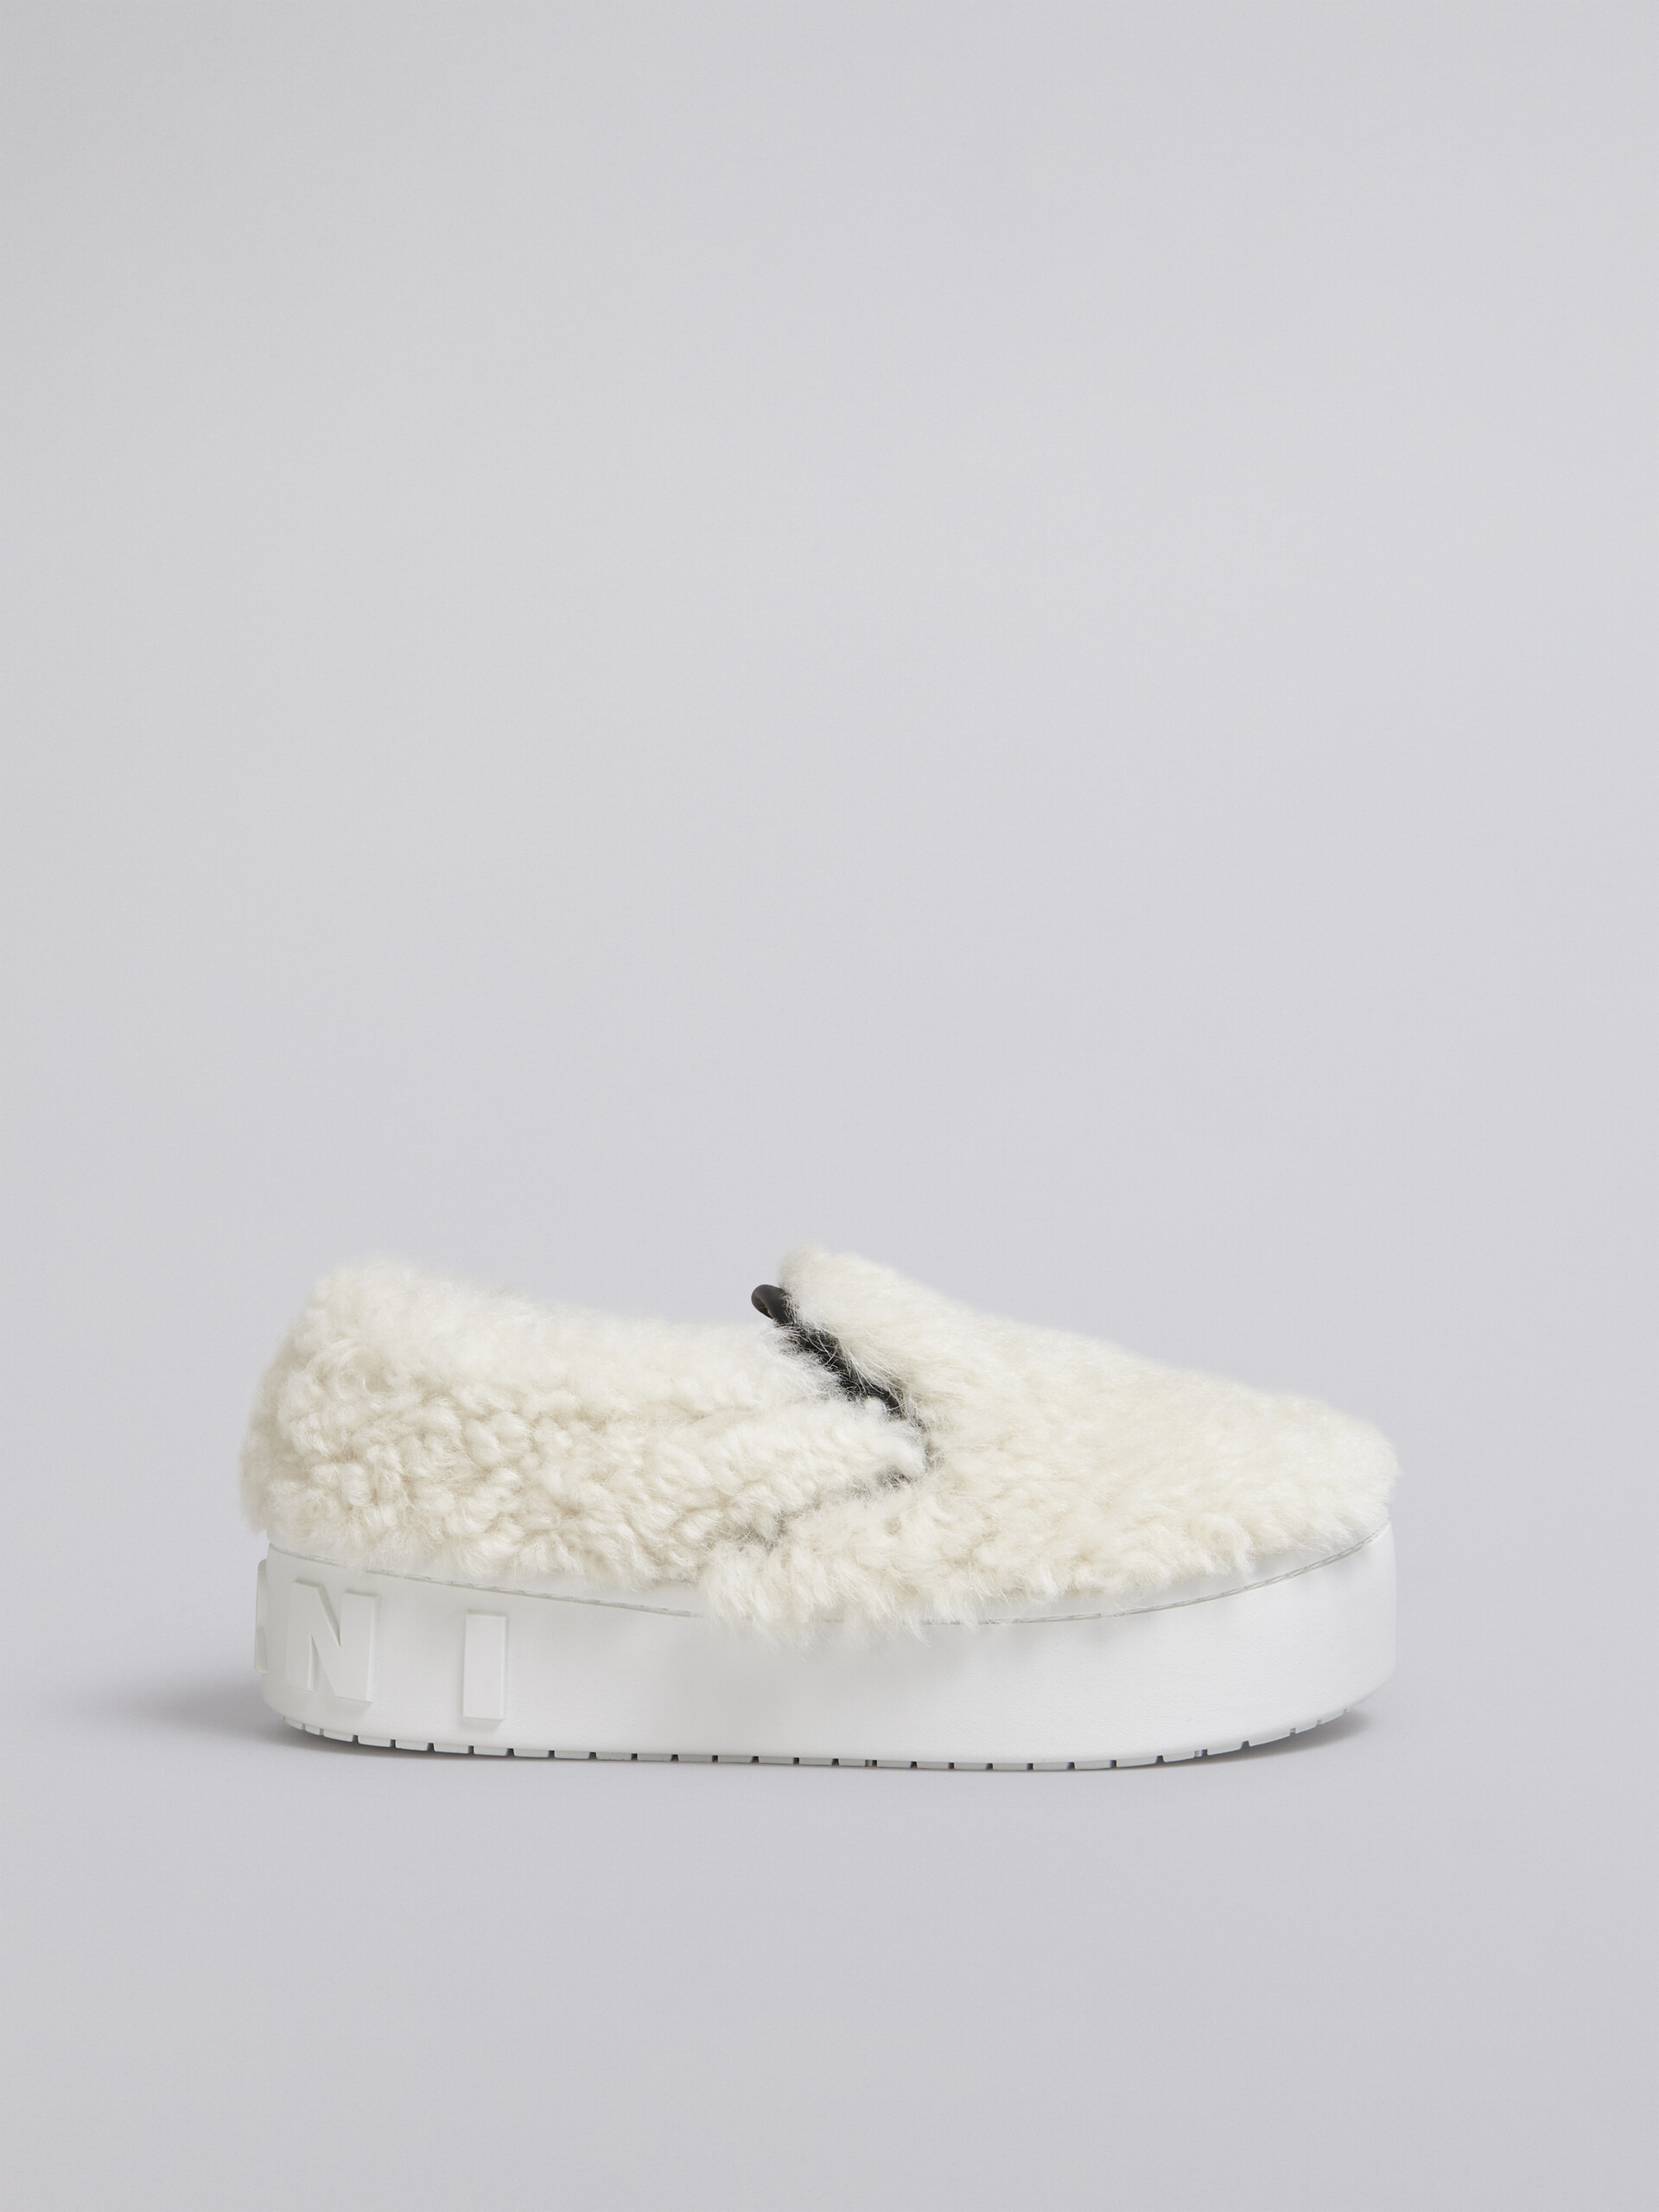 White shearling slip-on sneaker with maxi Marni logo - Sneakers - Image 1